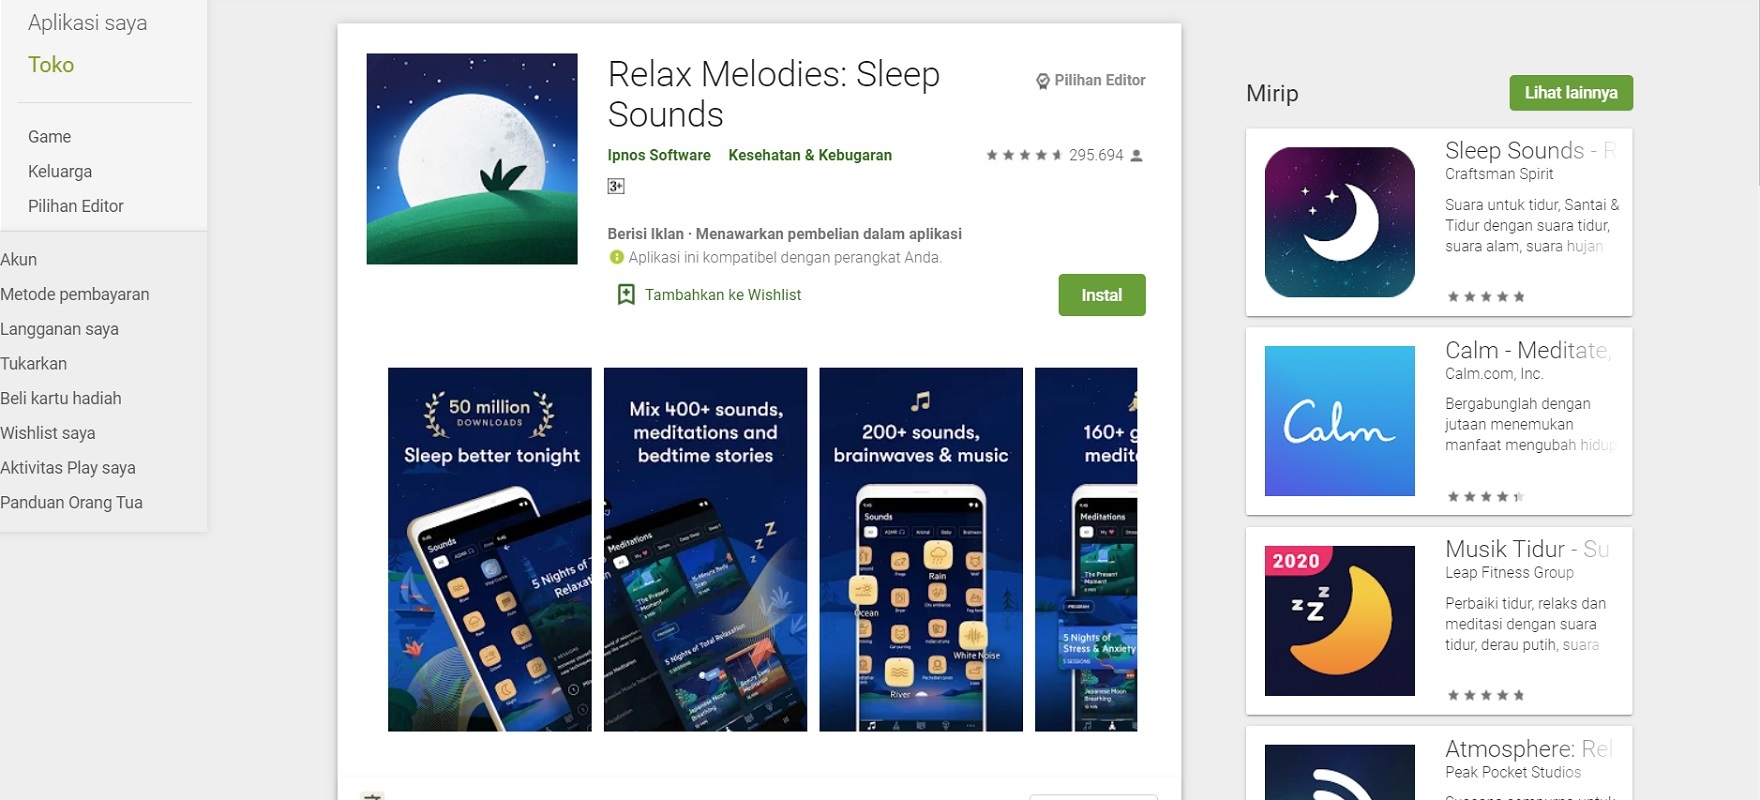 relax melodies and sleep